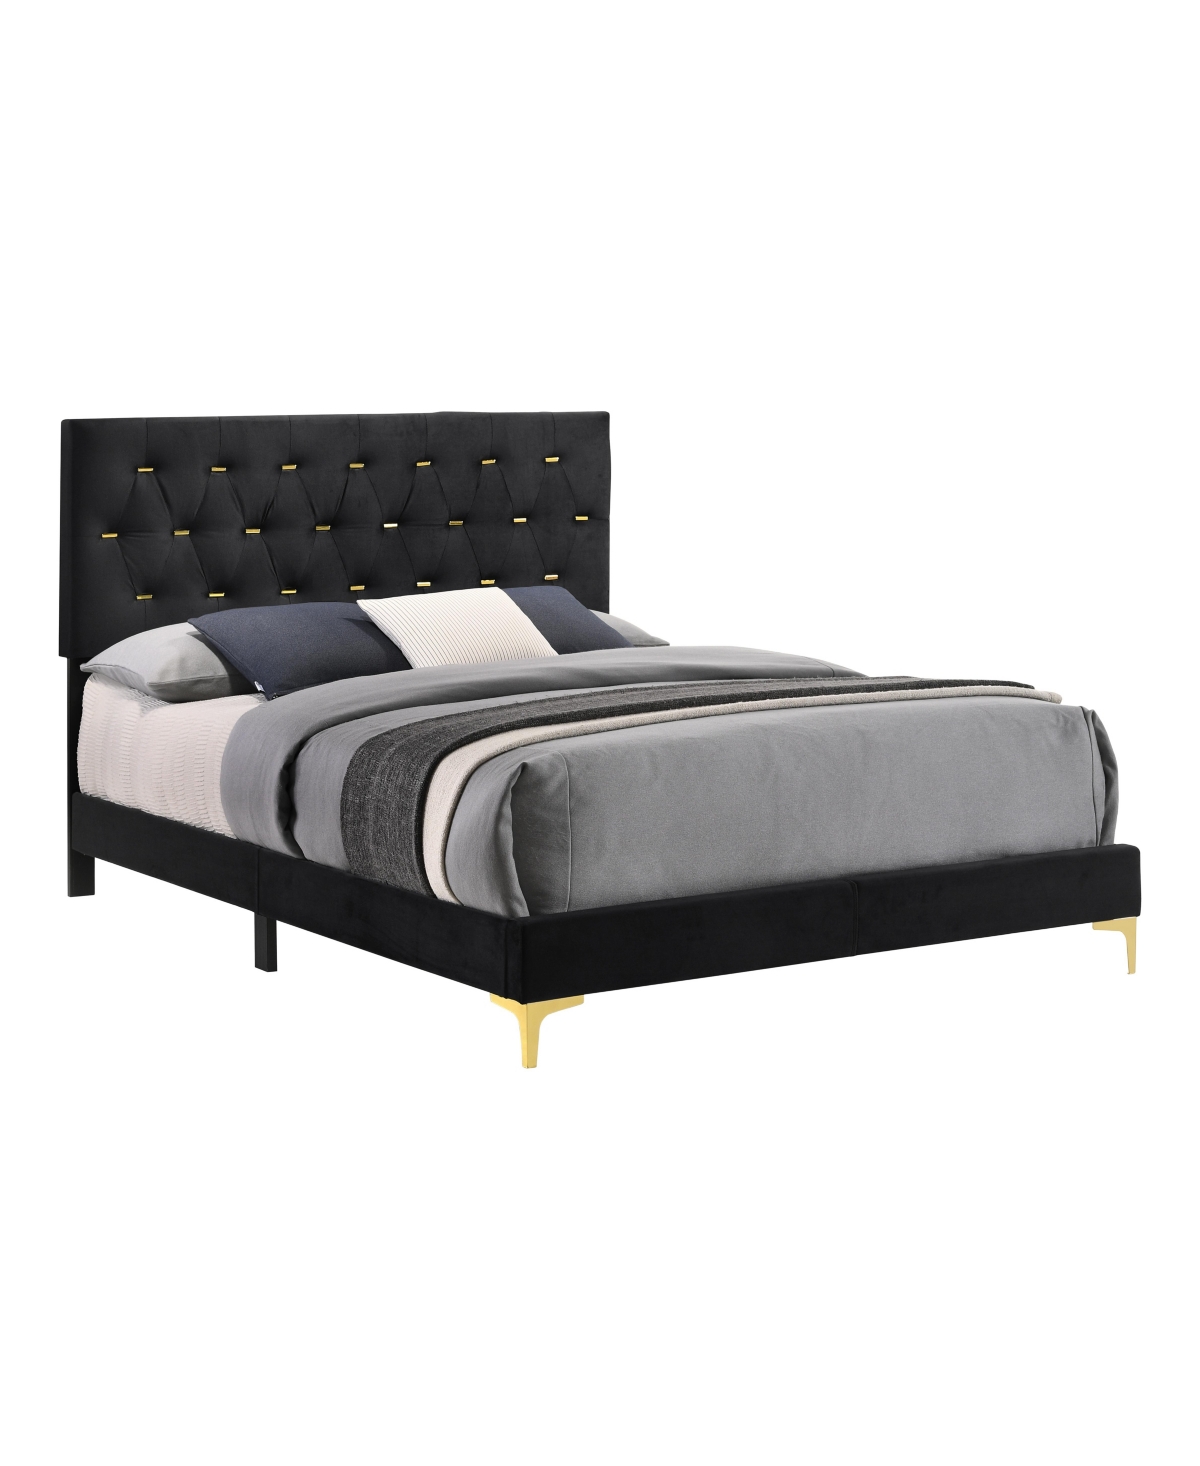 Coaster Home Furnishings Kendall 49.25" Asian Hardwood Tufted Panel Queen Bed In Black